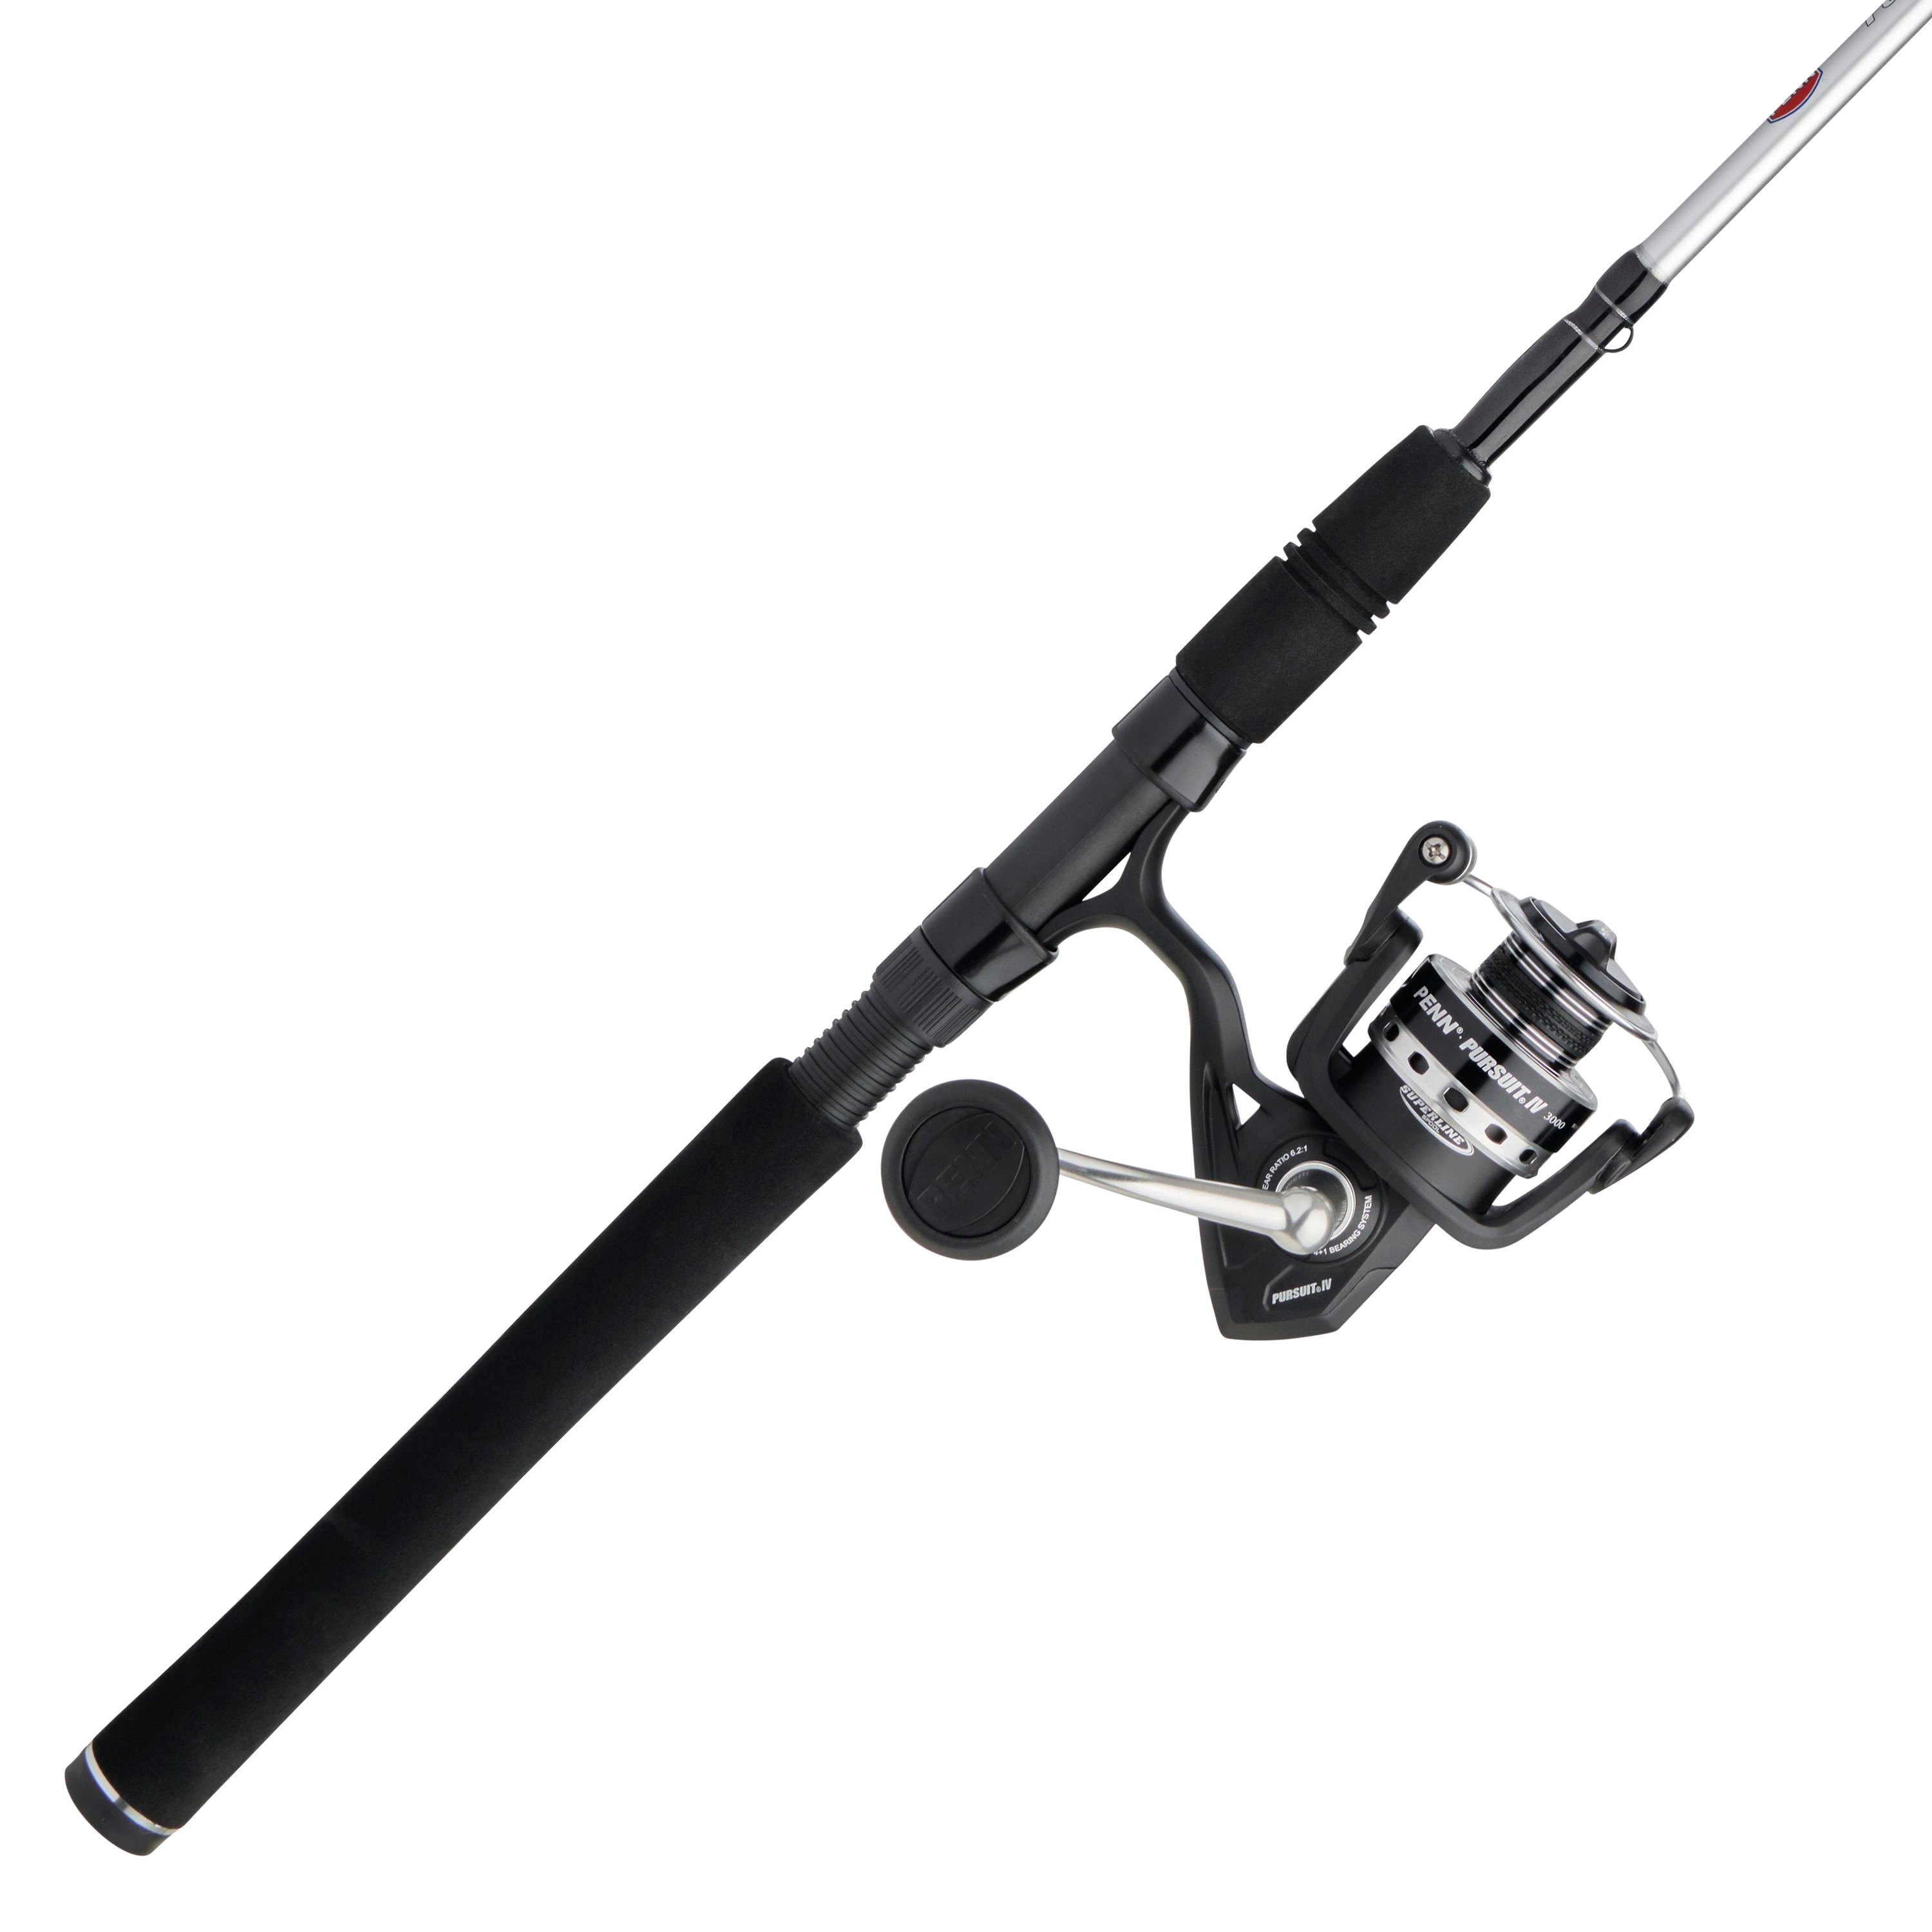 Penn Pursuit Spin Combo 7' Medium Rod With 4000 Reel, 46% OFF